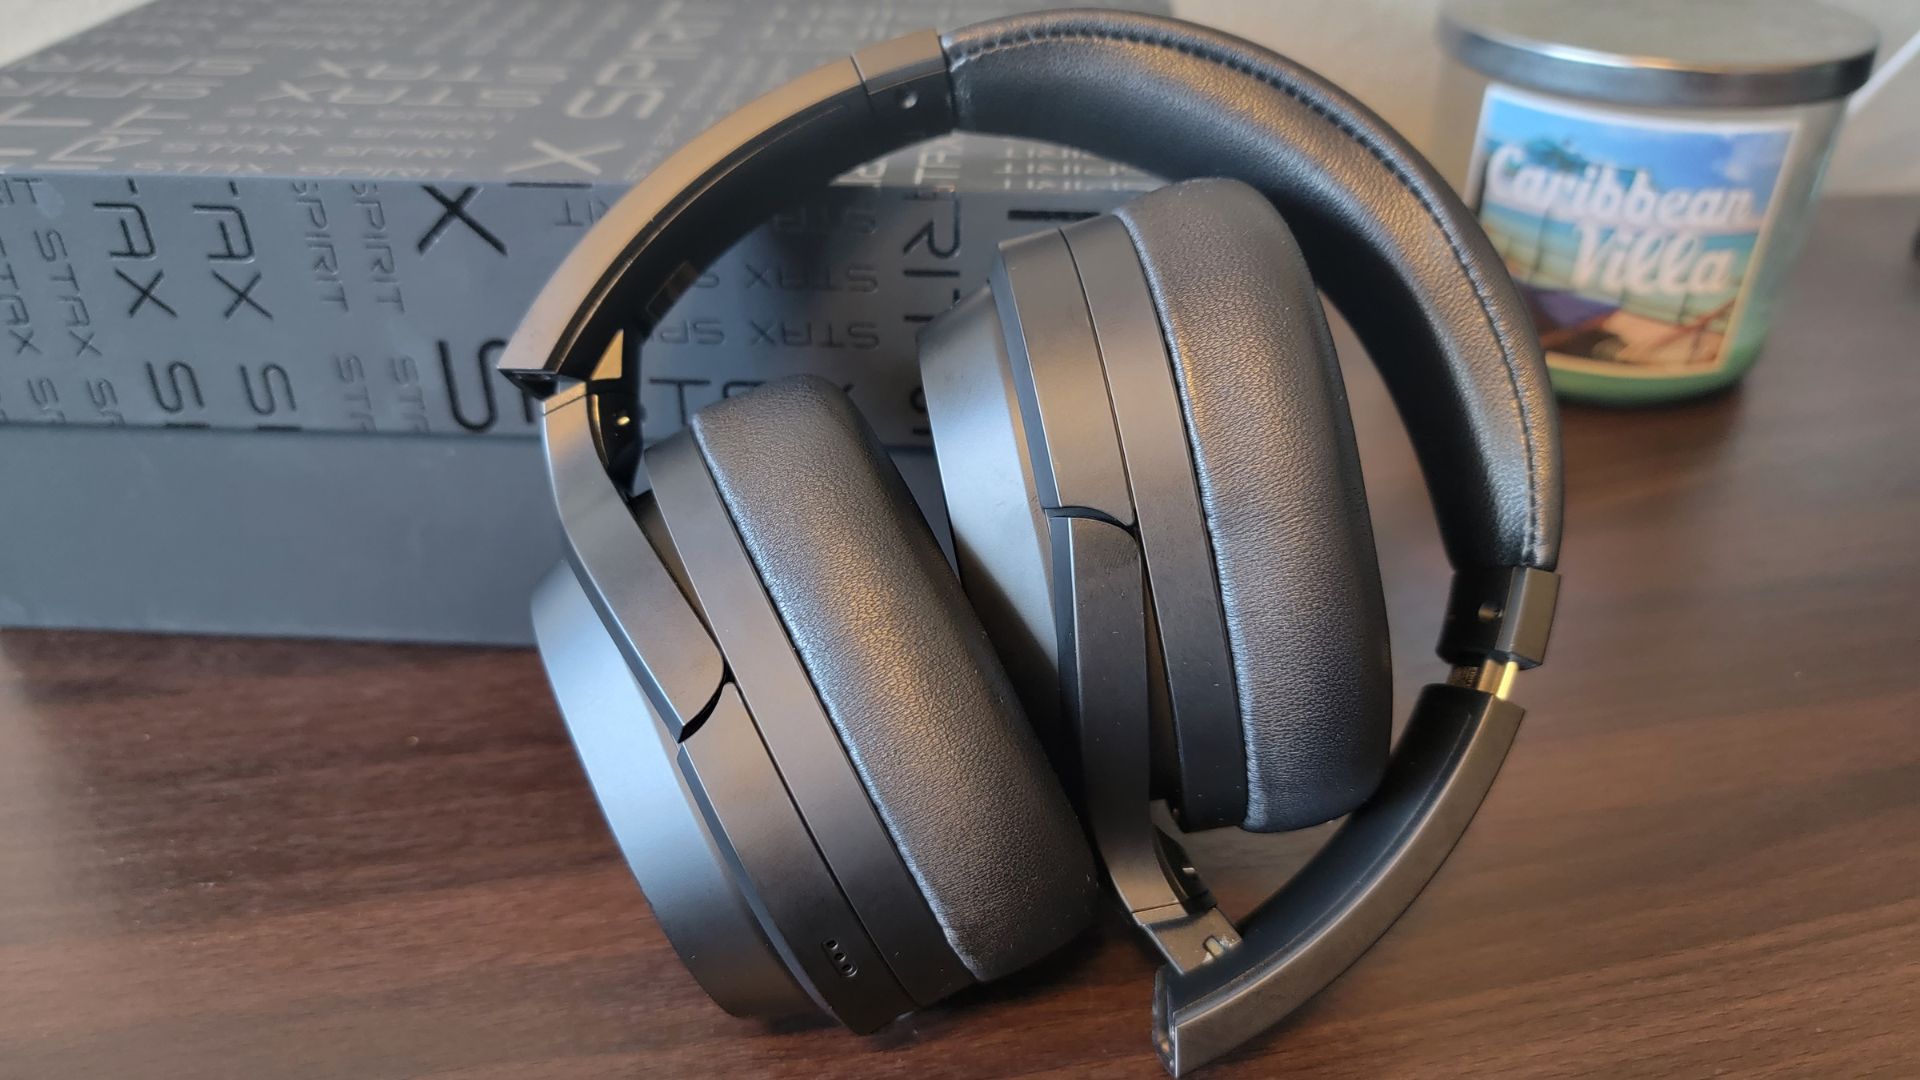 edifier stax spirit s3 planar magnetic headphones folded up compactly on a wooden desk